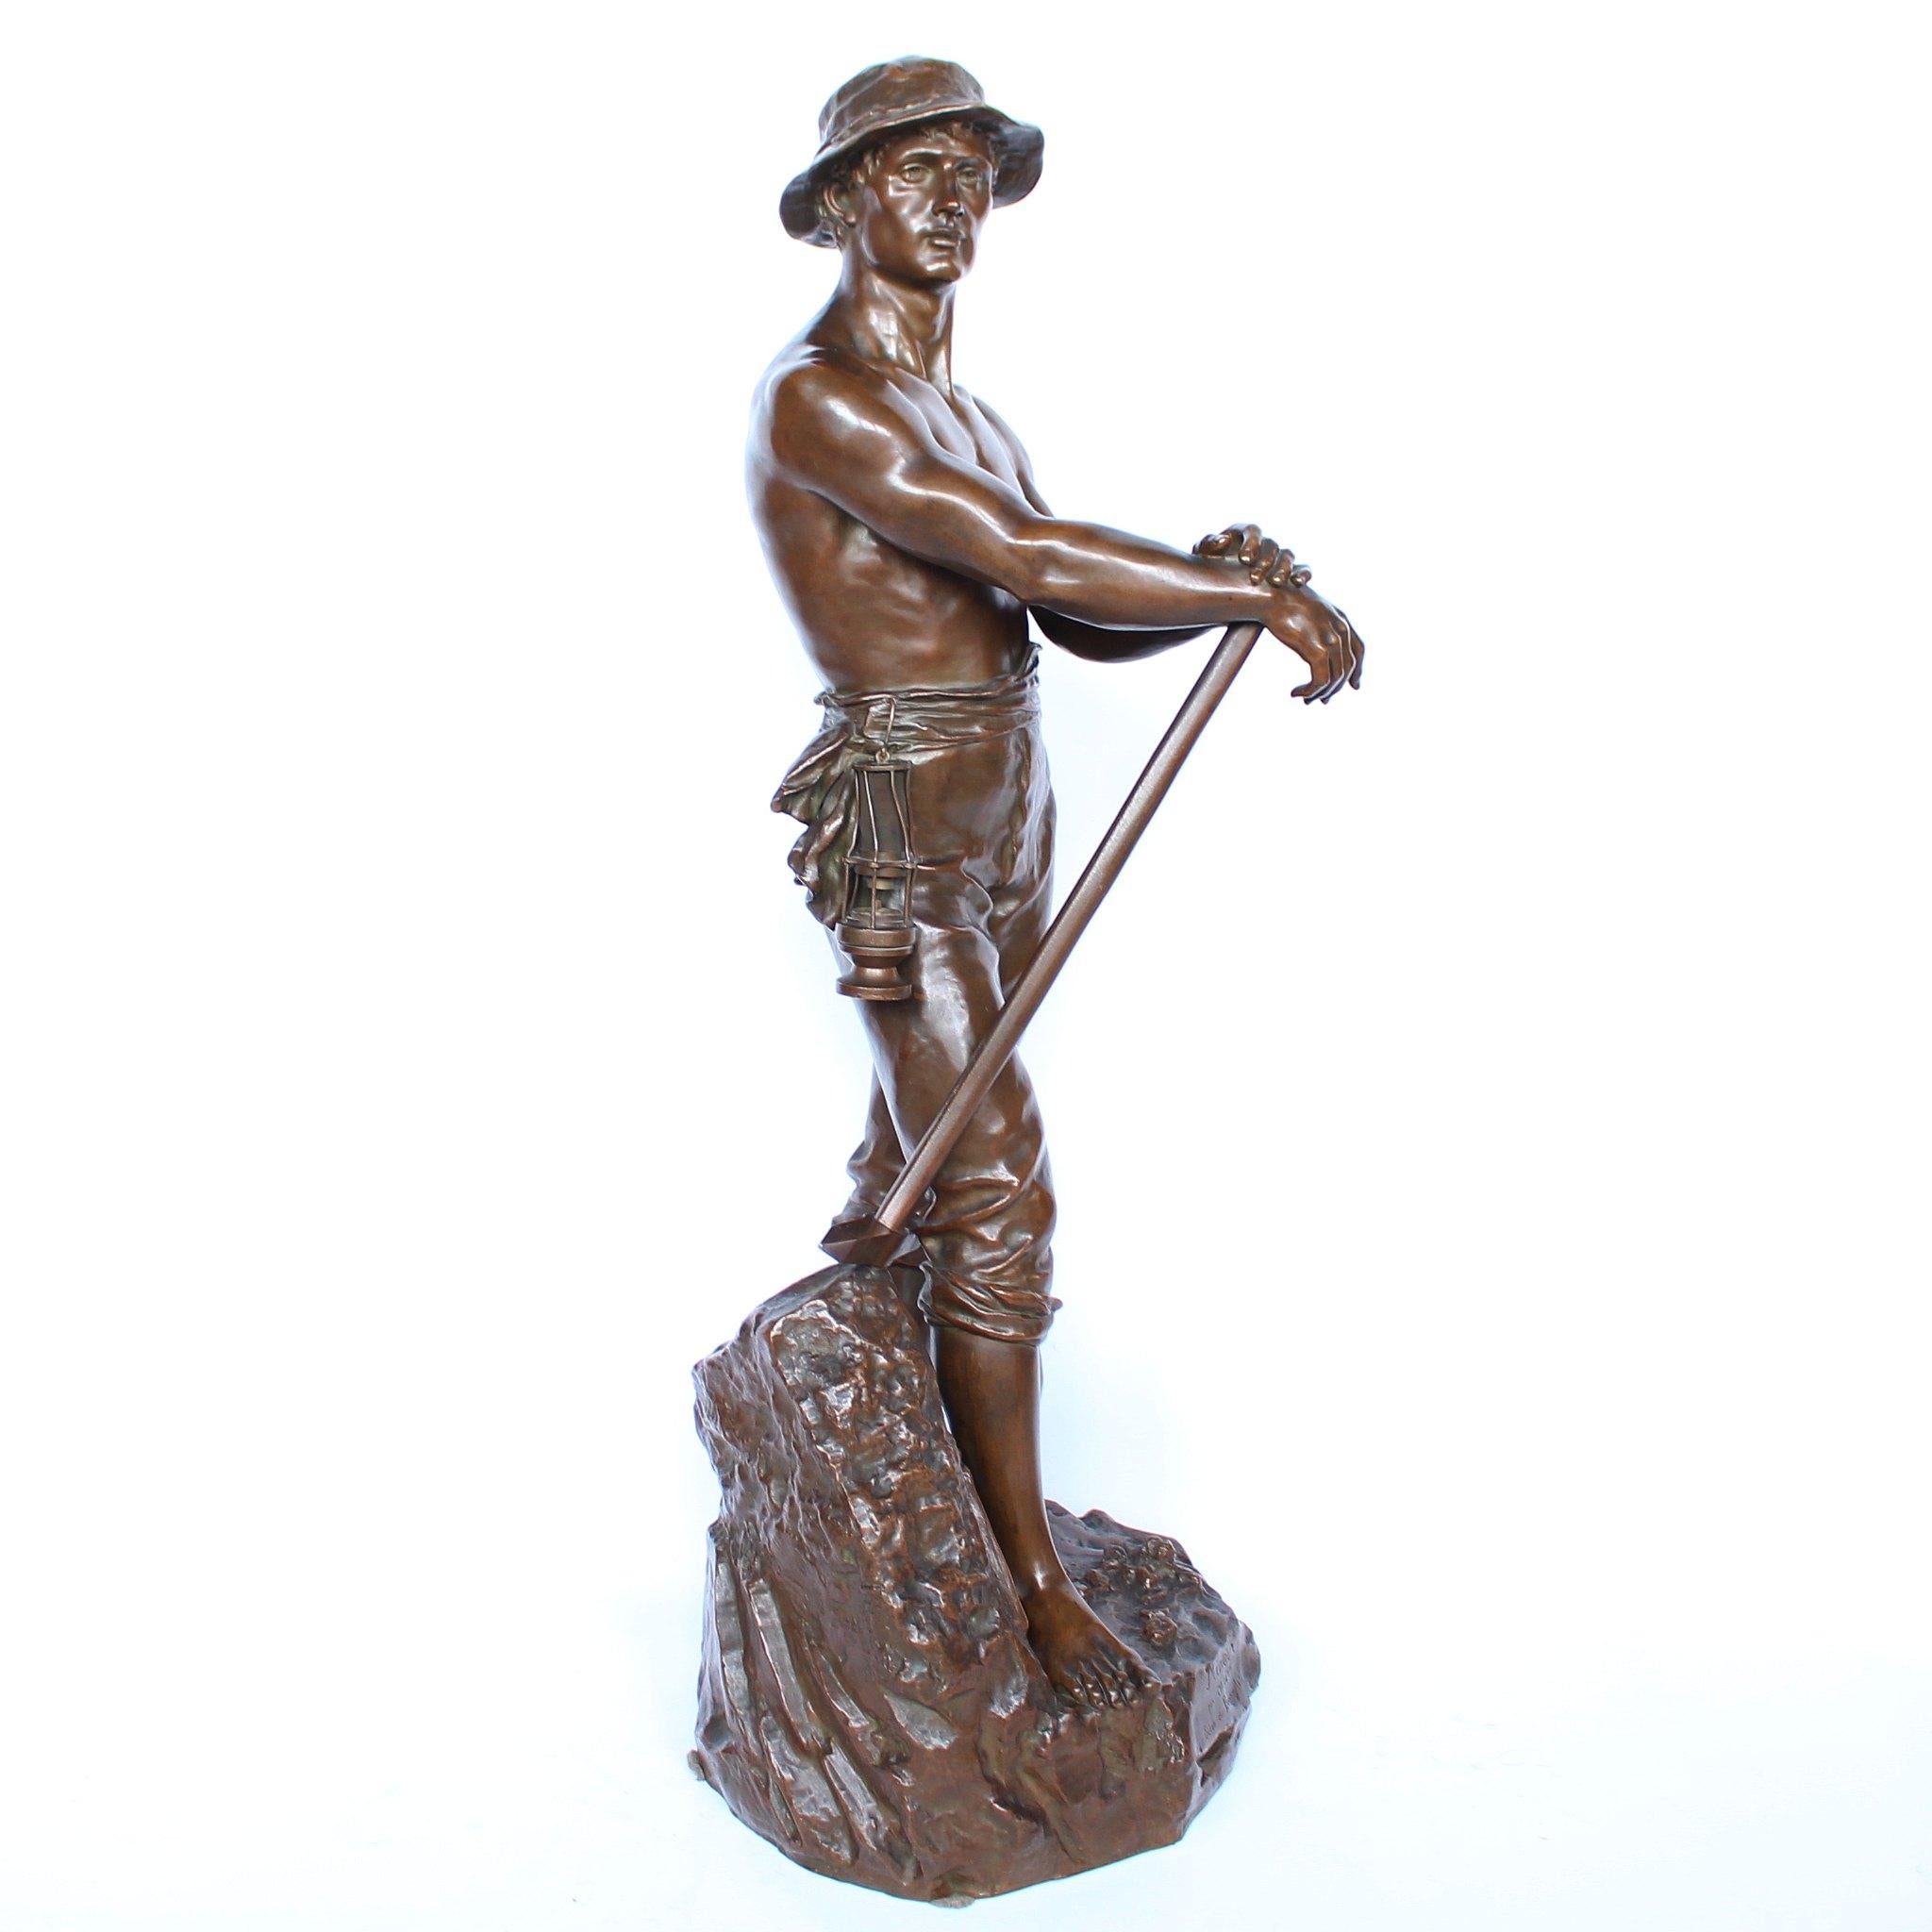 Polished 19th Century 1 Metre Tall Bronze Sculpture of a Bare Chested Man, France 1890